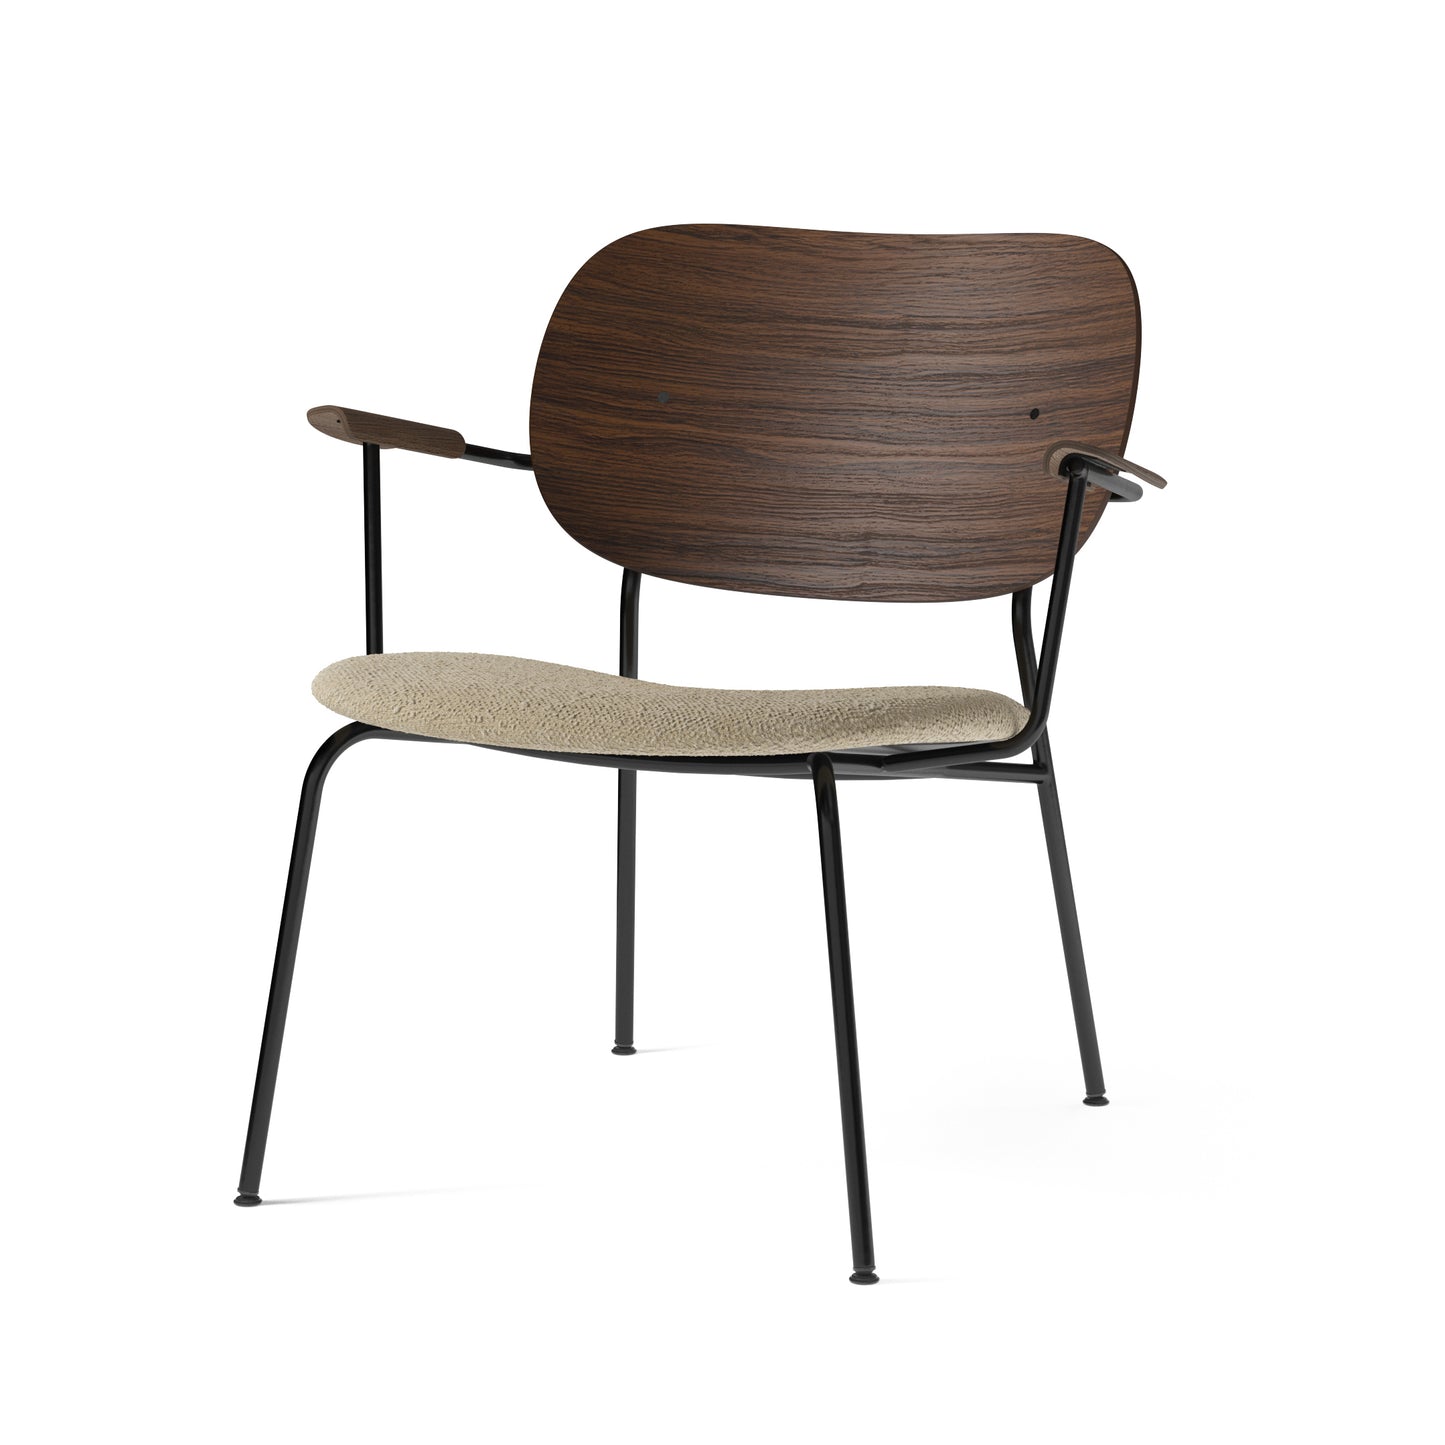 Co Lounge Chair - Upholstered Seat by Menu / Audo Copenhagen